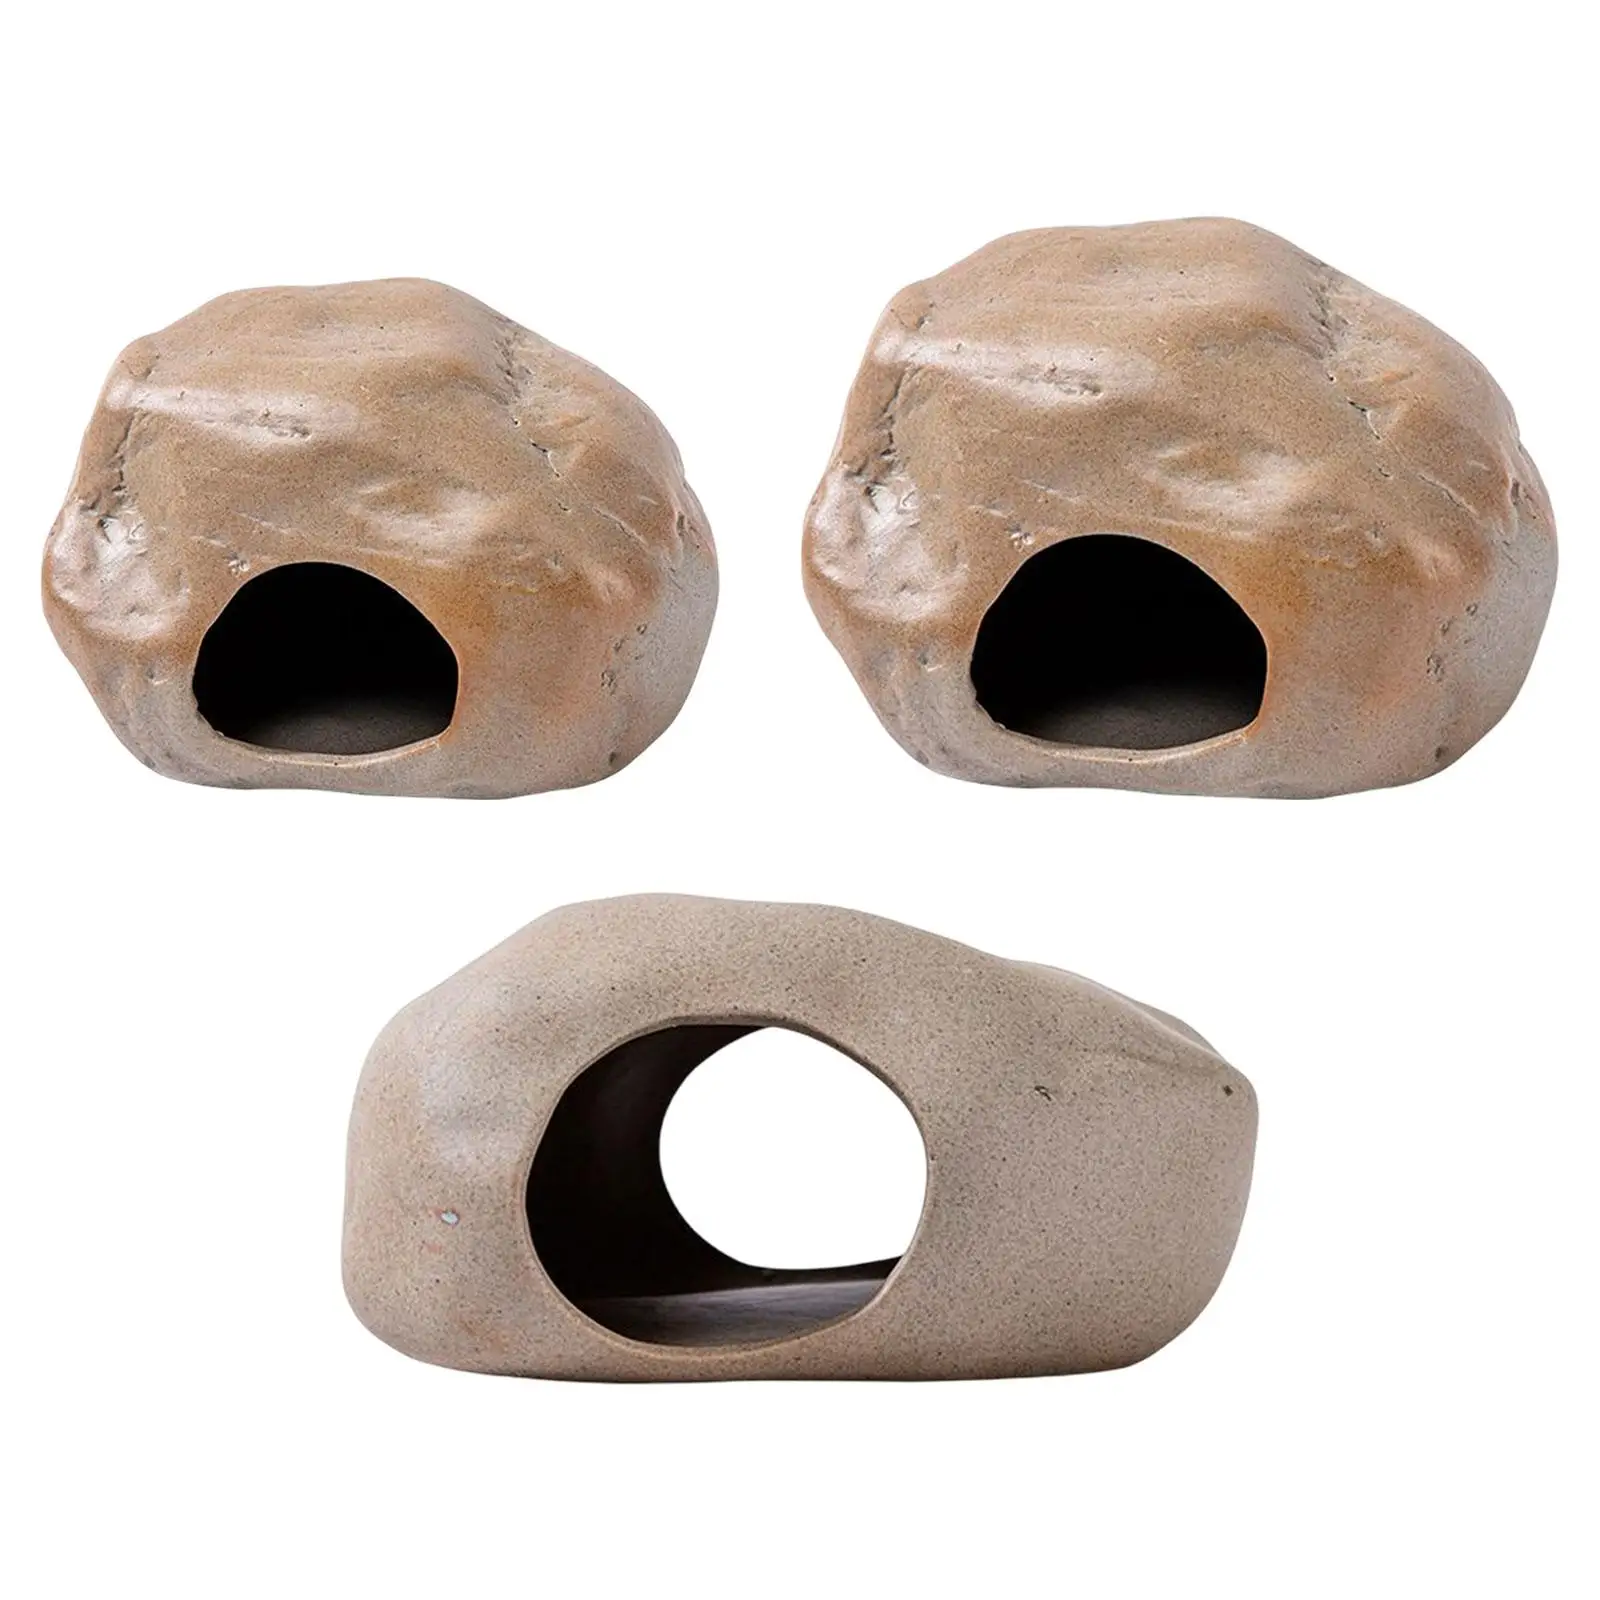 Ceramic Hamster Cave Small Animal Hideout House Indoor Outdoor Landscape Cage Bed Pets Habitat House Hut for Rats Chipmunk